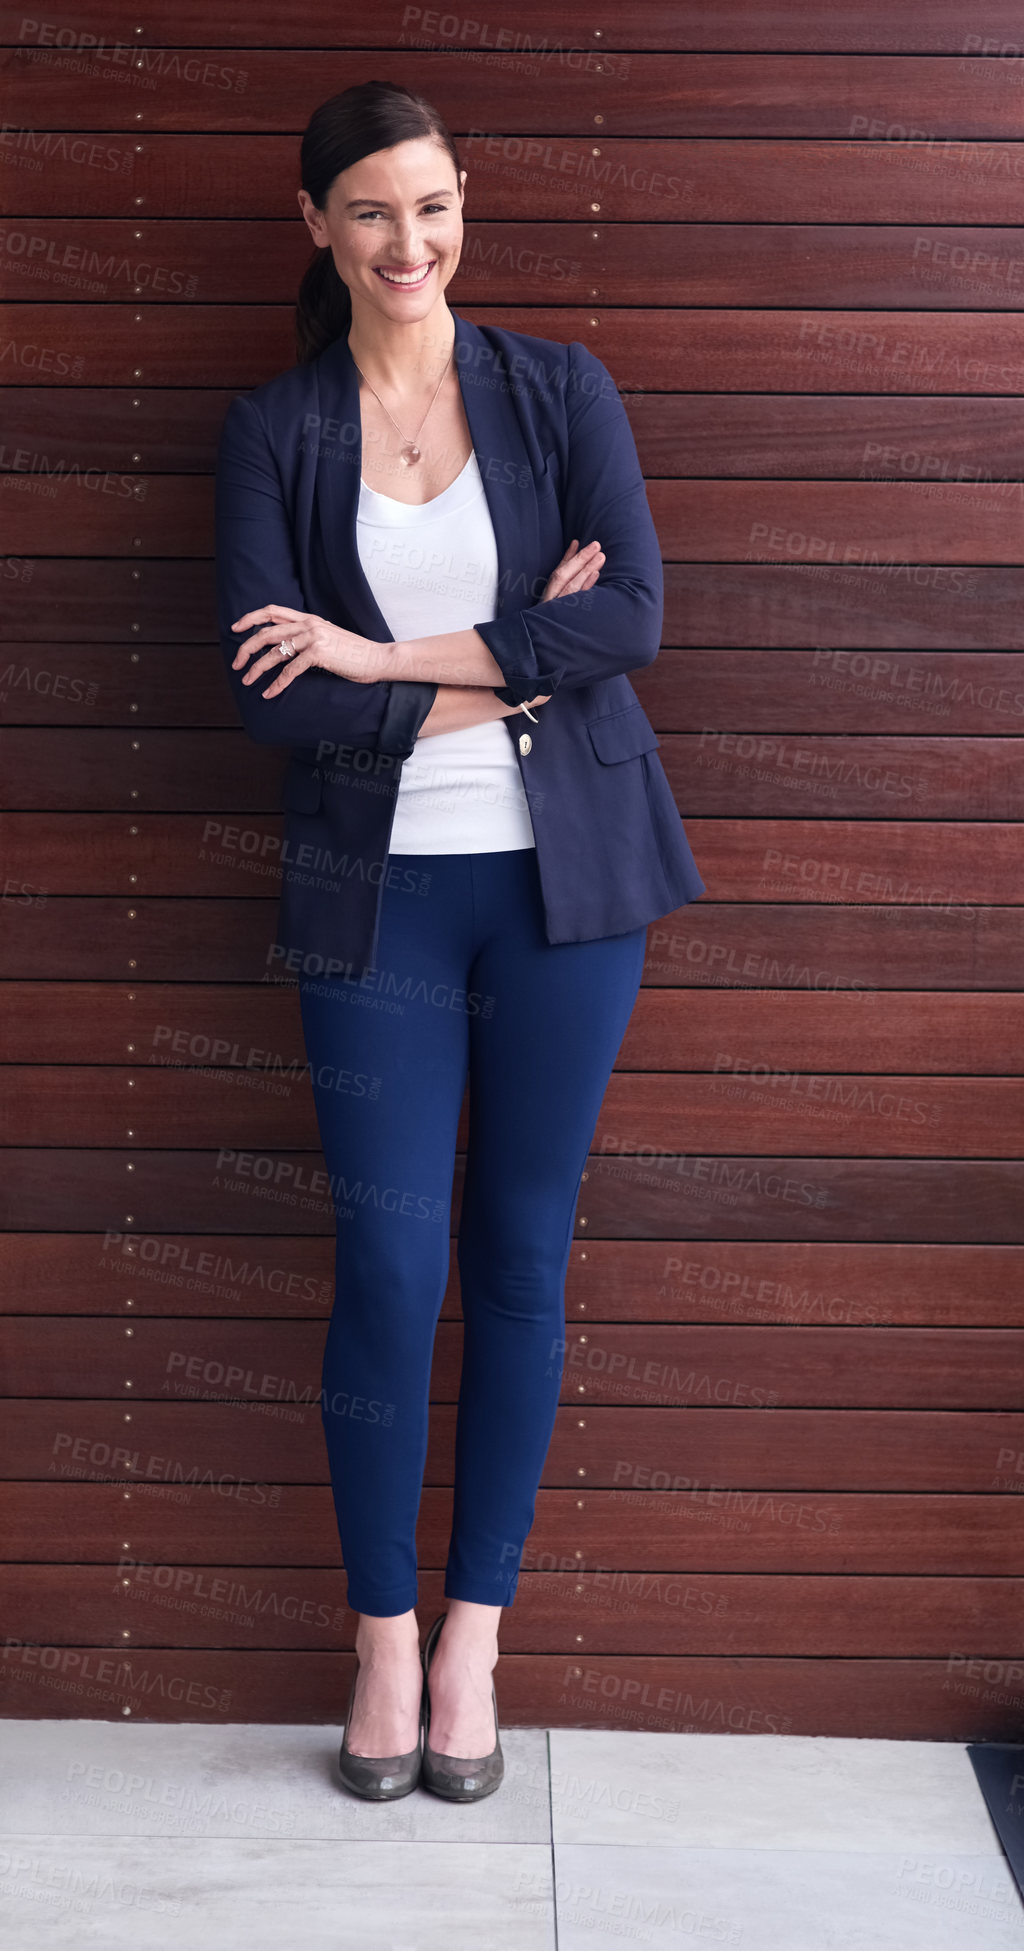 Buy stock photo Portrait of a happy businesswoman standing with her arms folded against a wooden background